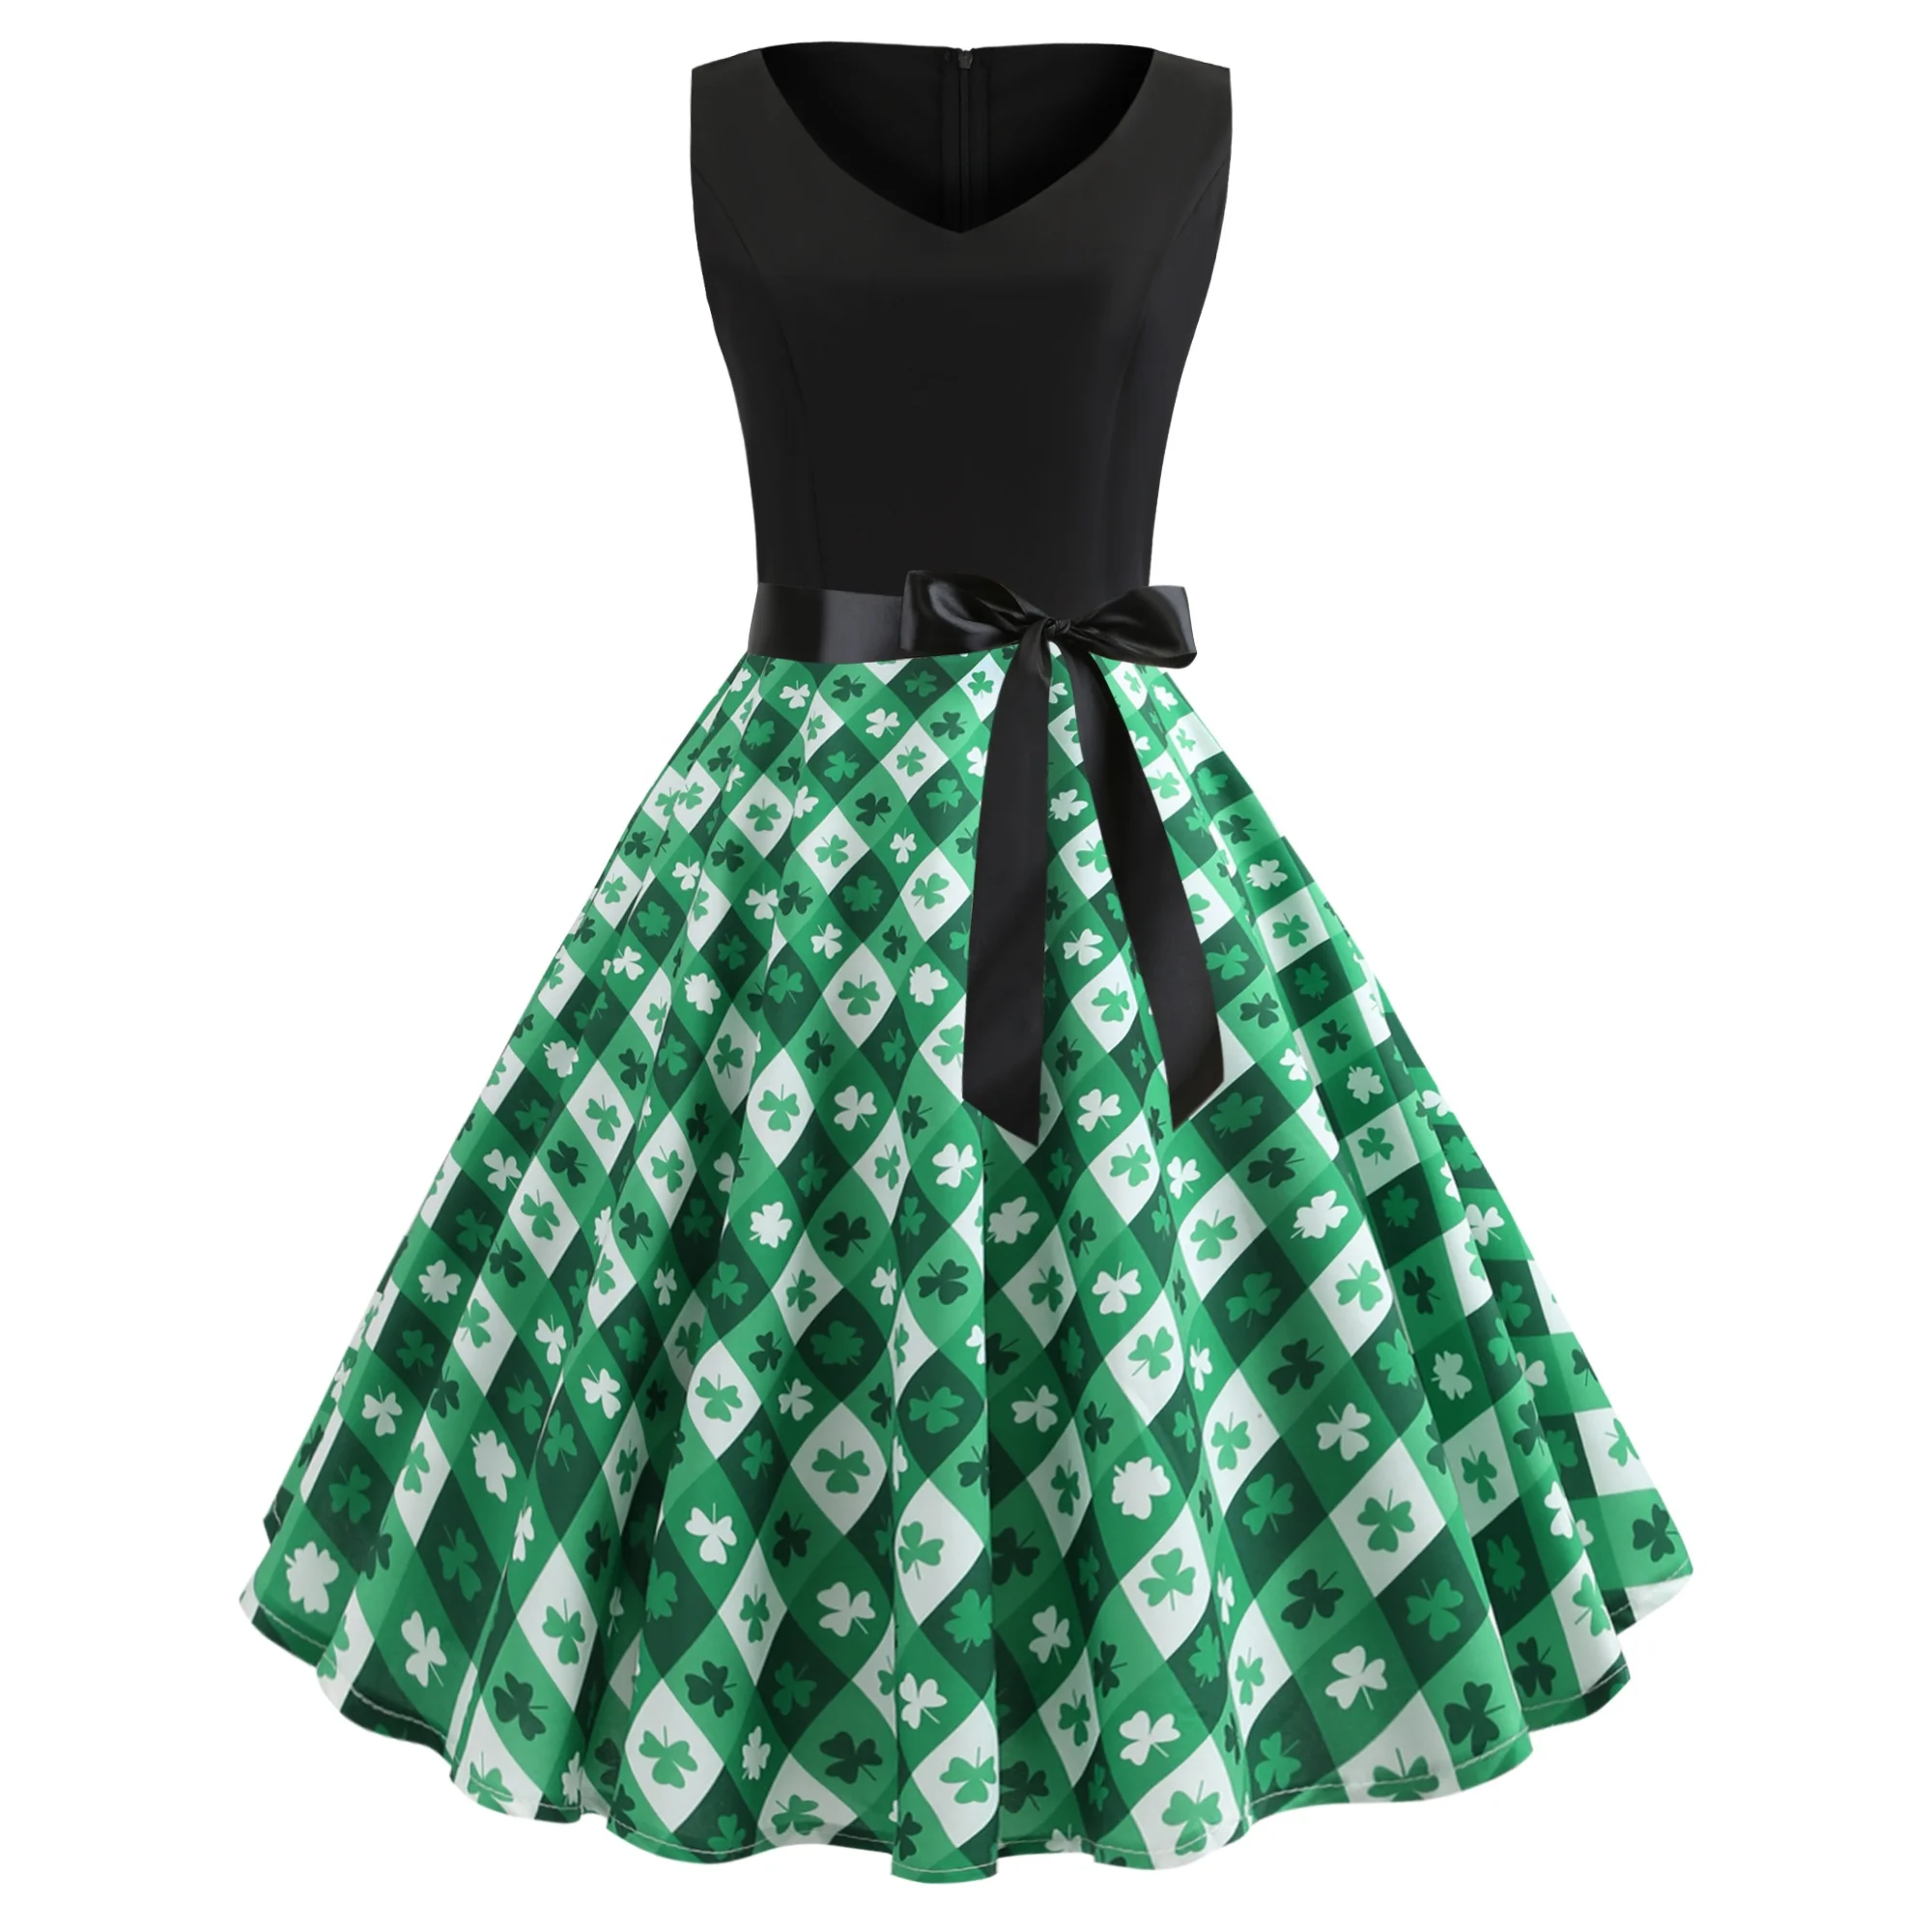 

Wholesales St. Patrick's Day Clothing Check Clover V Neck 1950s Reto Vintage Cocktail Party Spring Summer Dress SP-Y4039, Shown